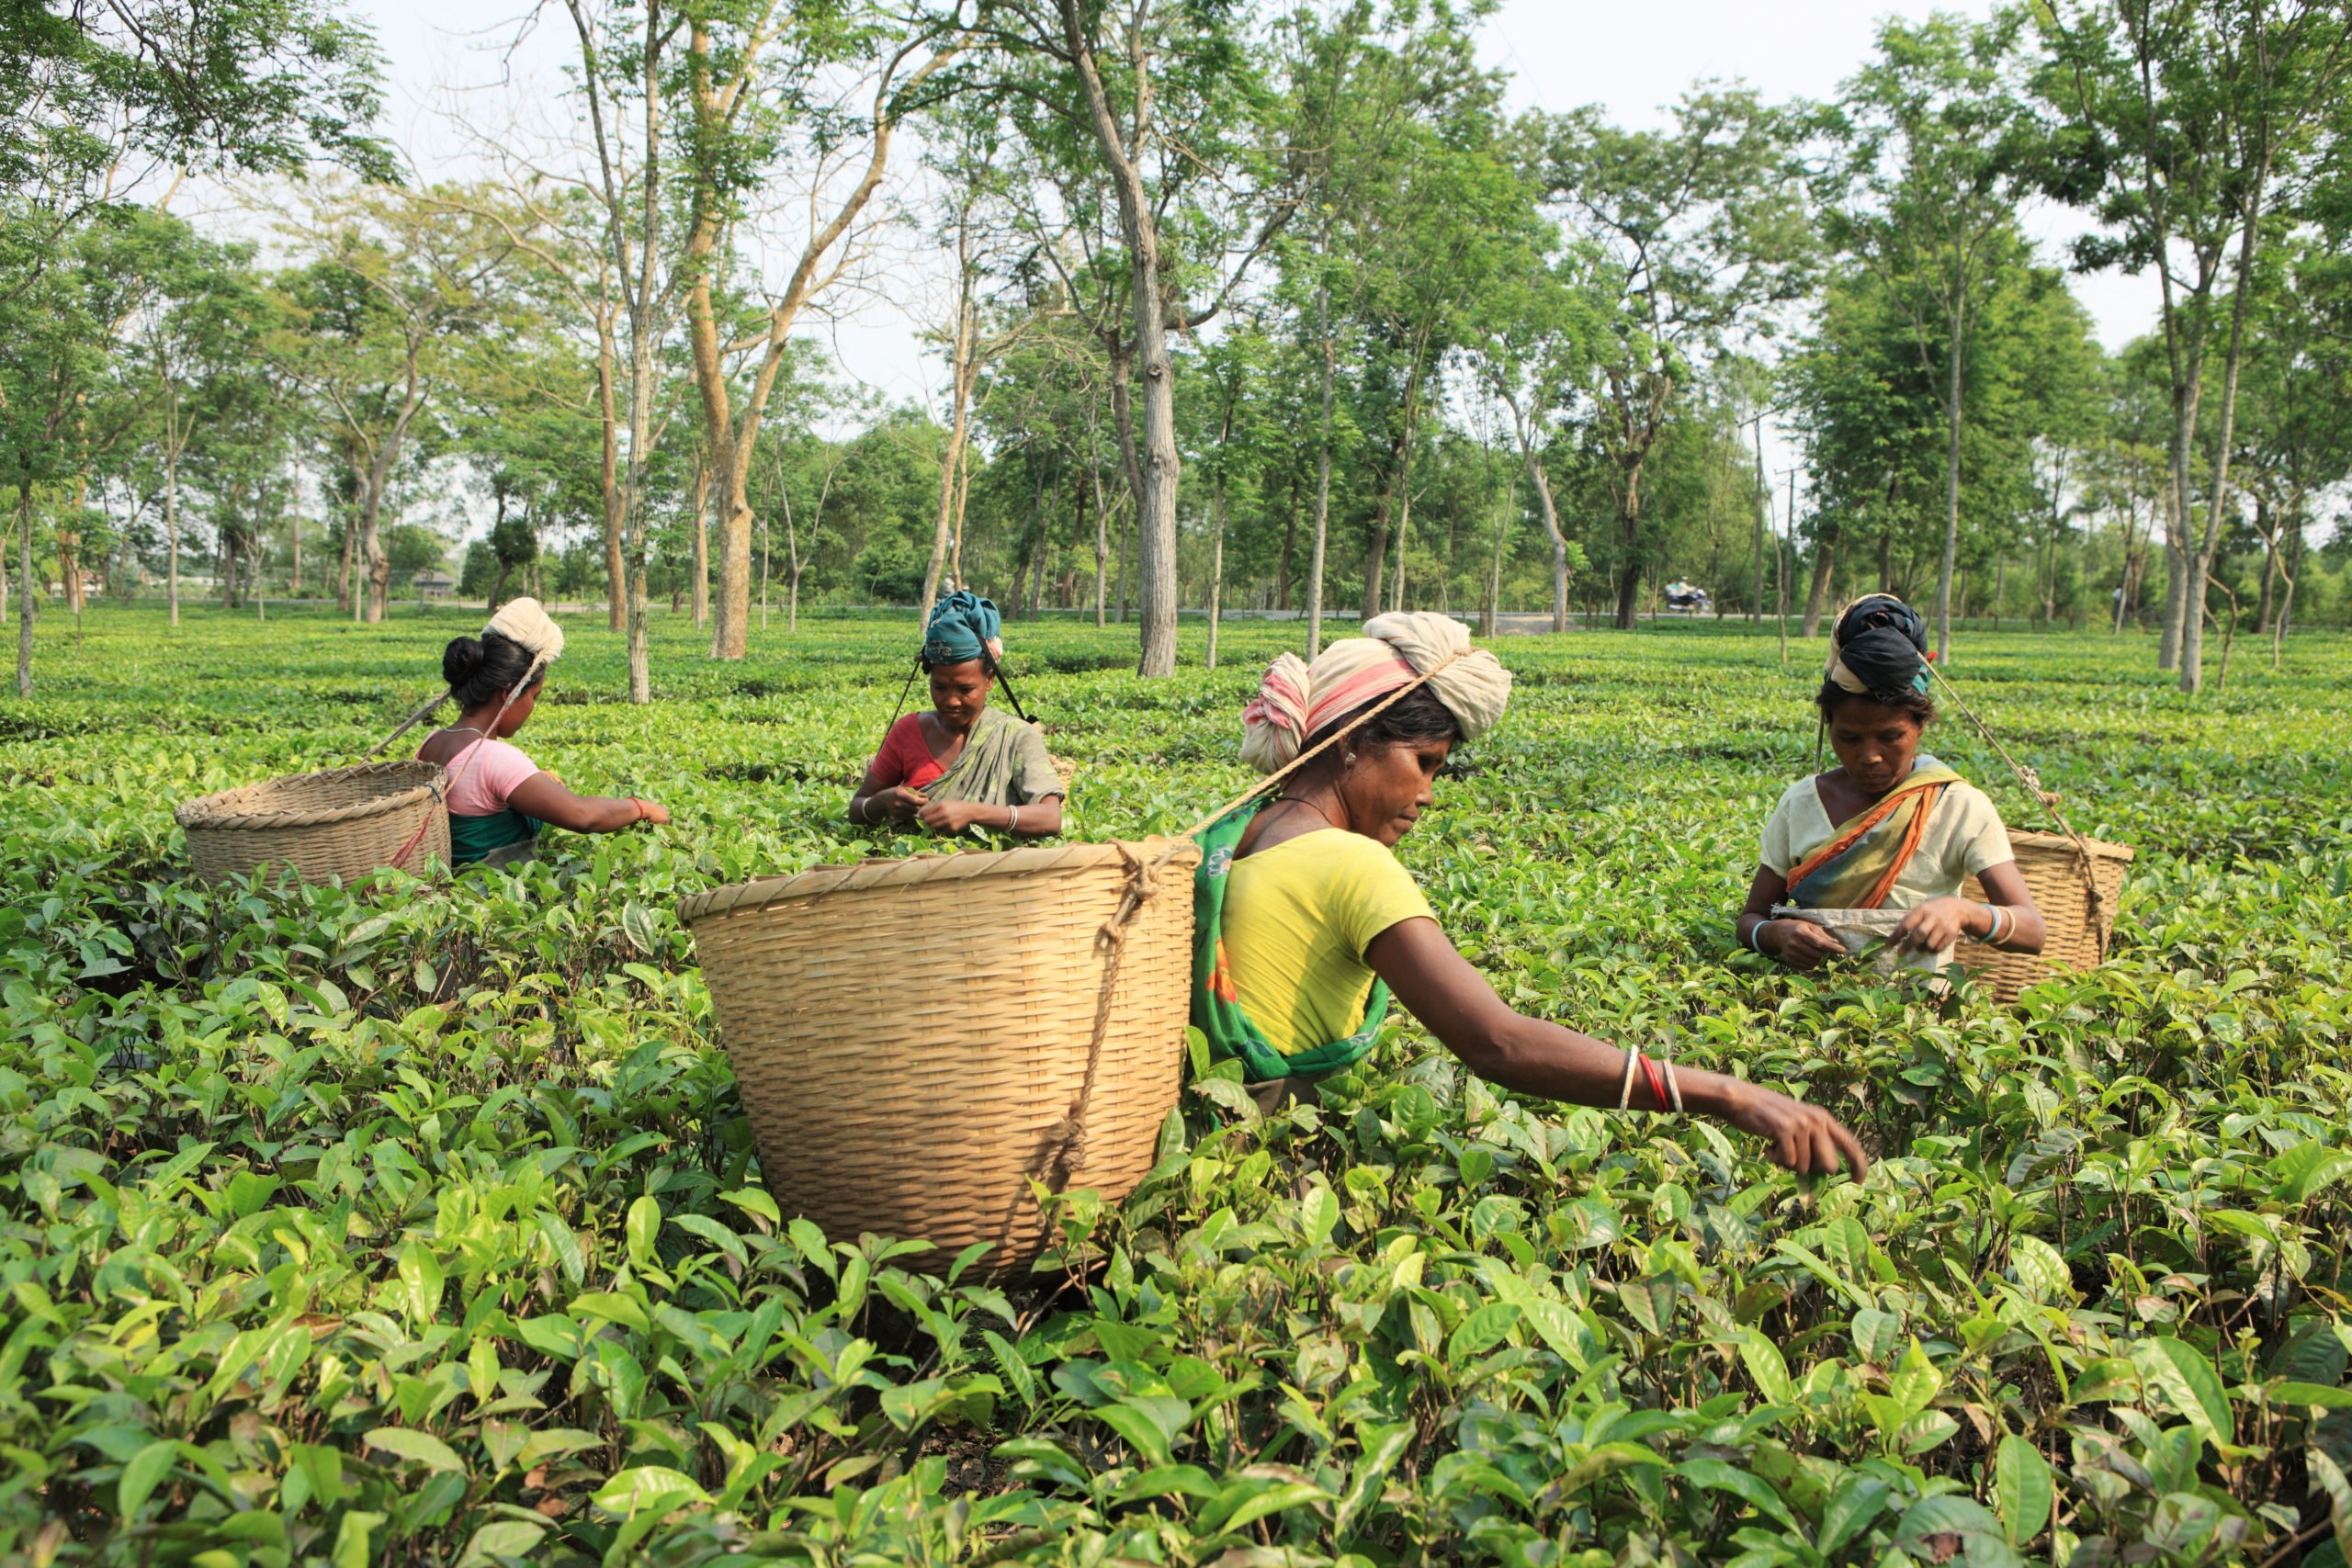 Workers pick tea leaves on a plantation in Assam, India,